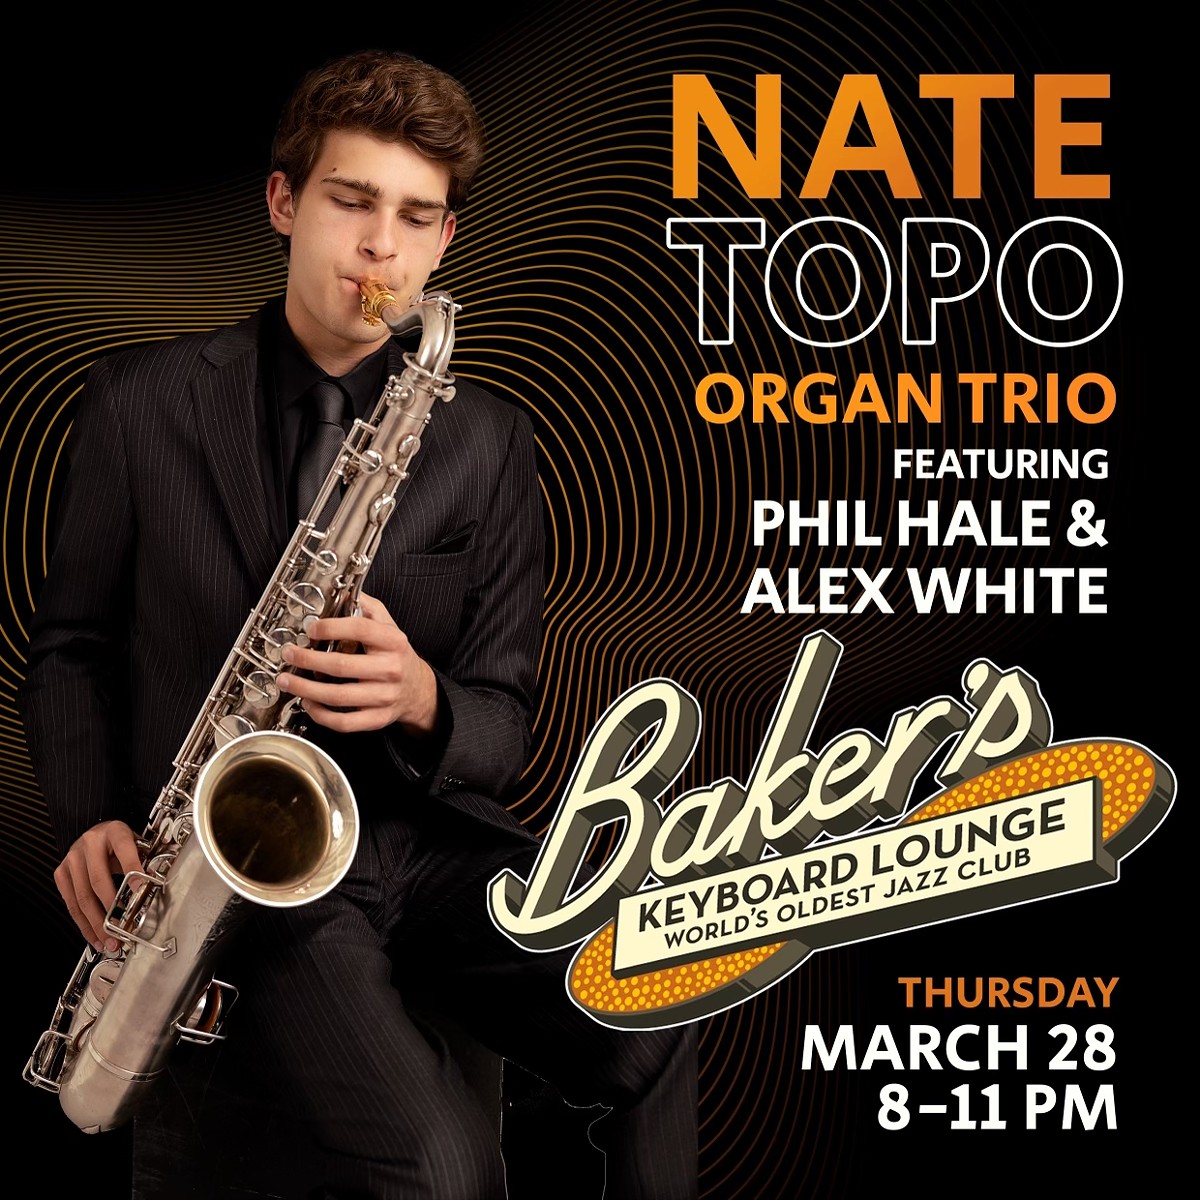 For info on Nate Topo and his other upcoming performances visit natetopo.com